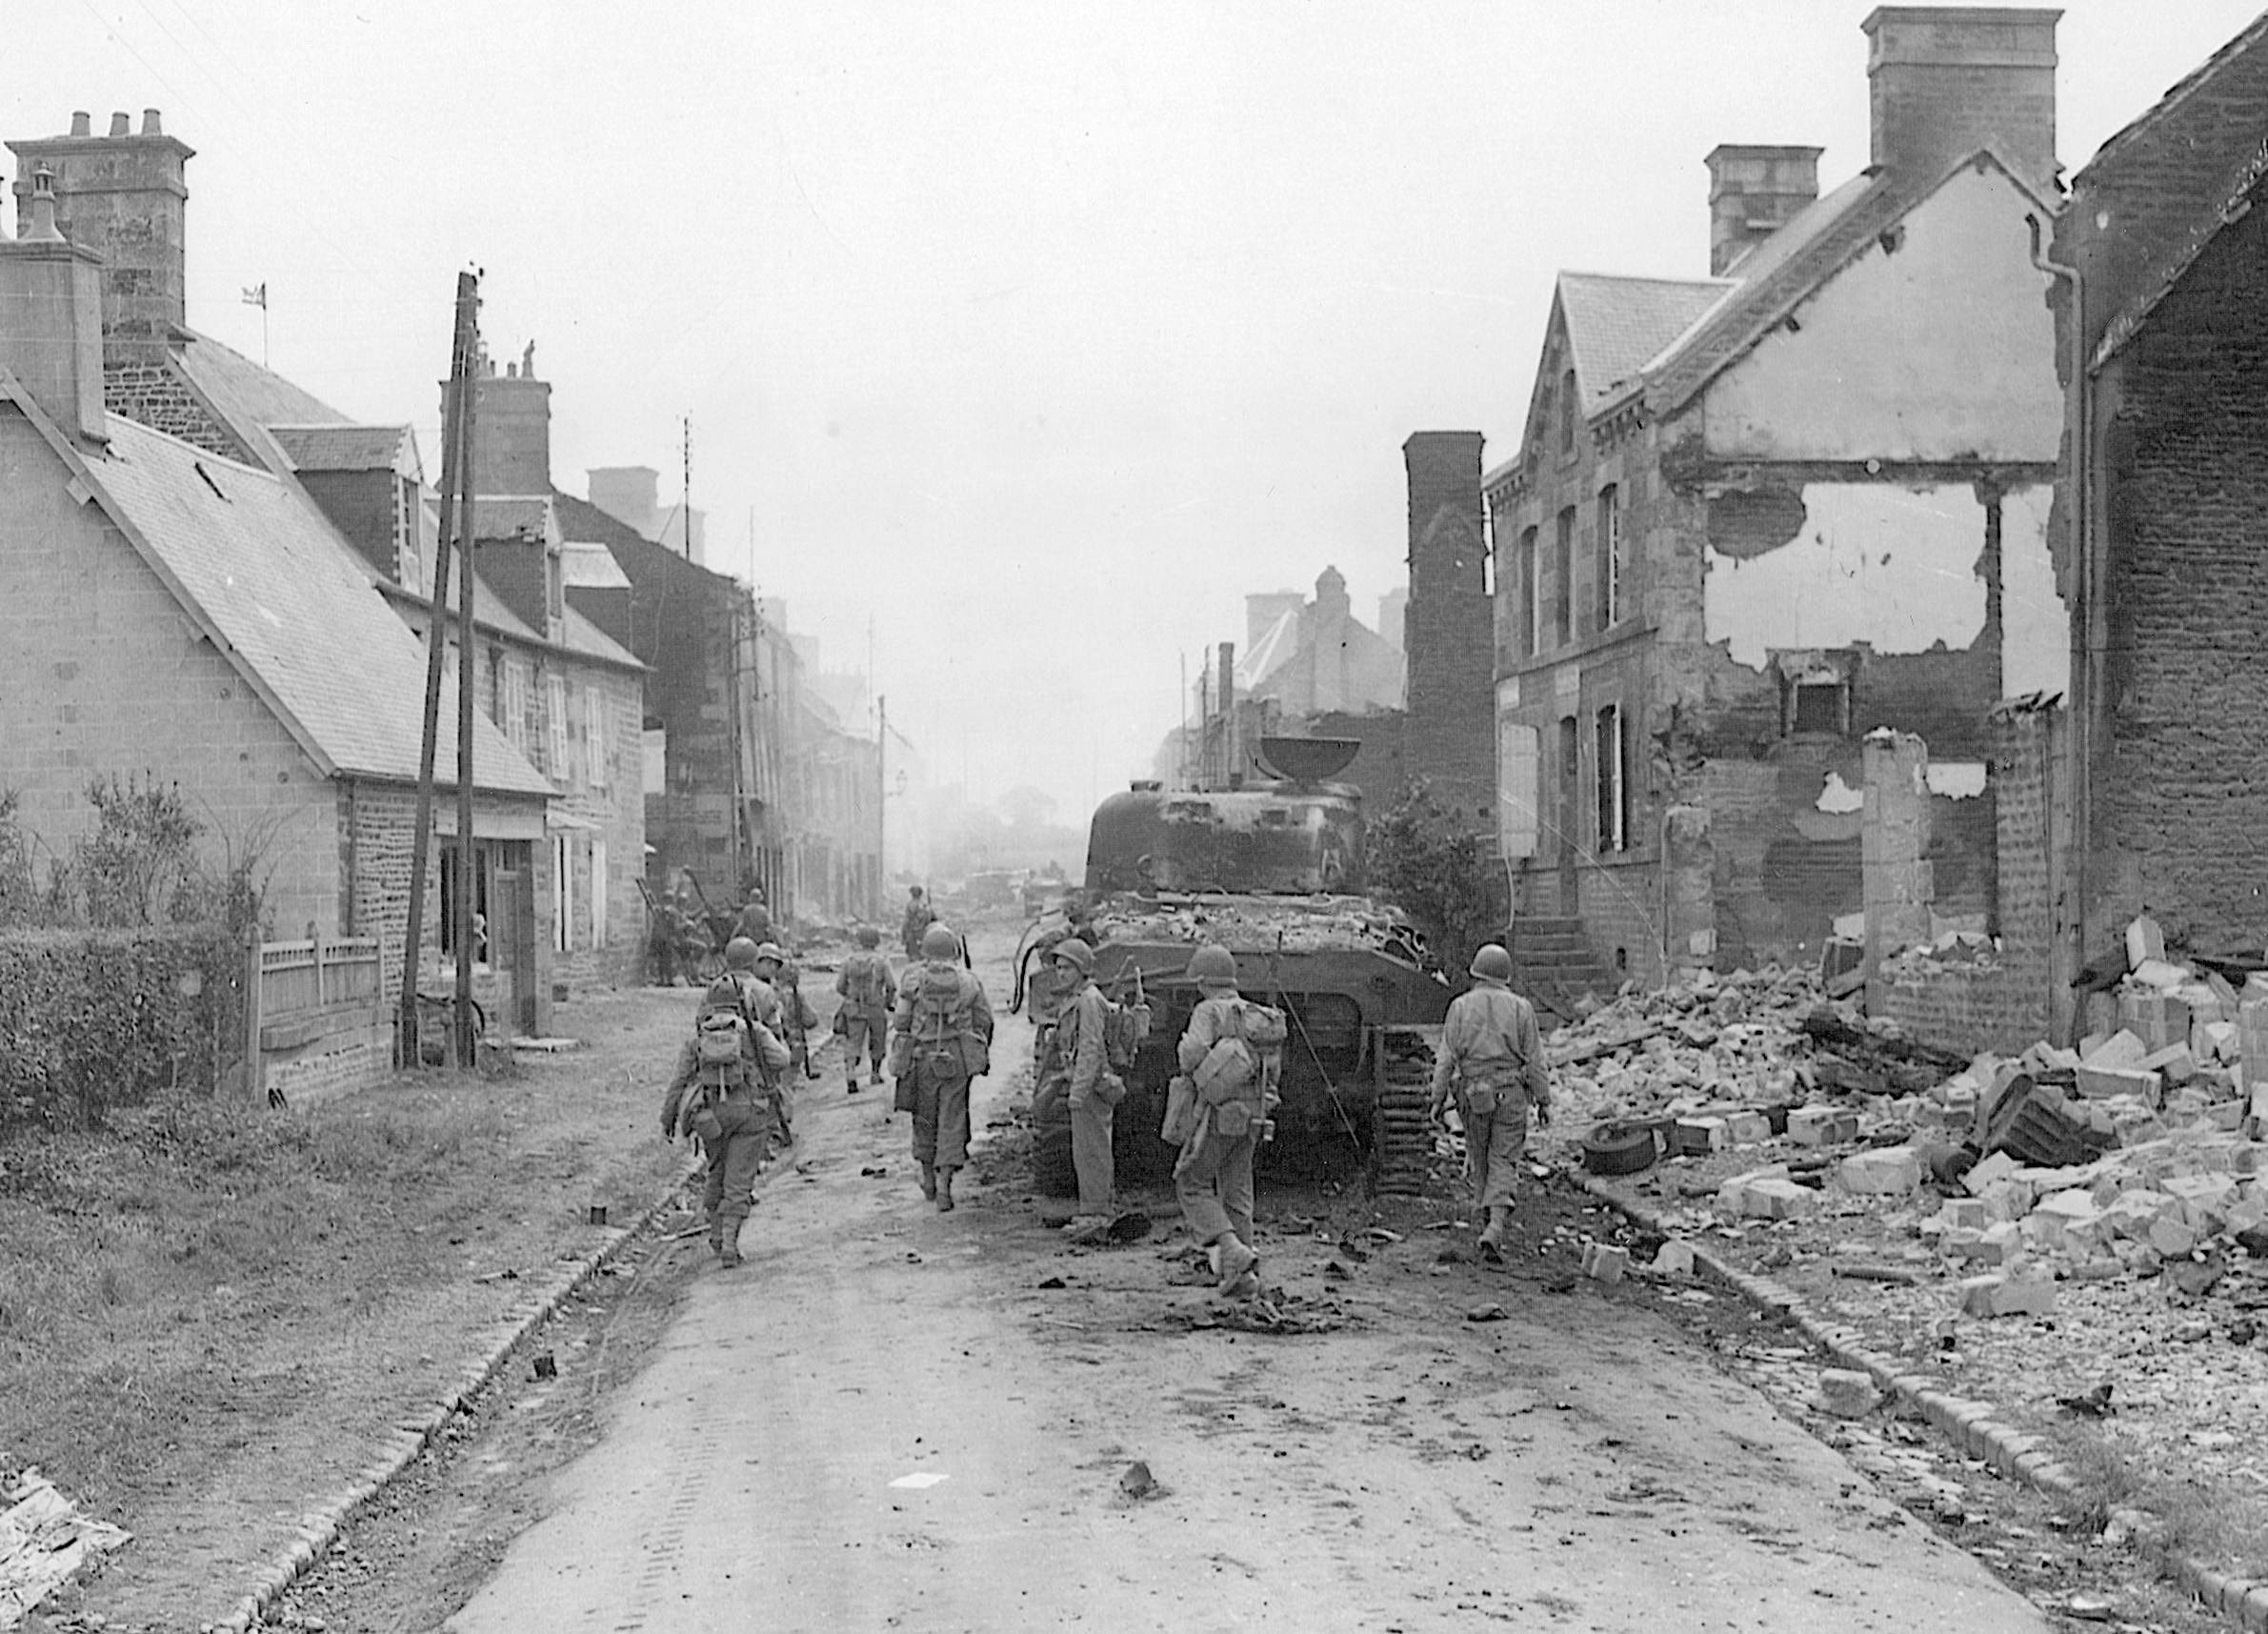 GIs trudge past the bulk of a Sherman tank knocked out during street fighting on August 3, 1944, as they advance toward the fighting at the strategic town of Mortain. The 30th Division lost approximately 1,800 men killed and wounded at Mortain, 277 of these defending Hill 314.